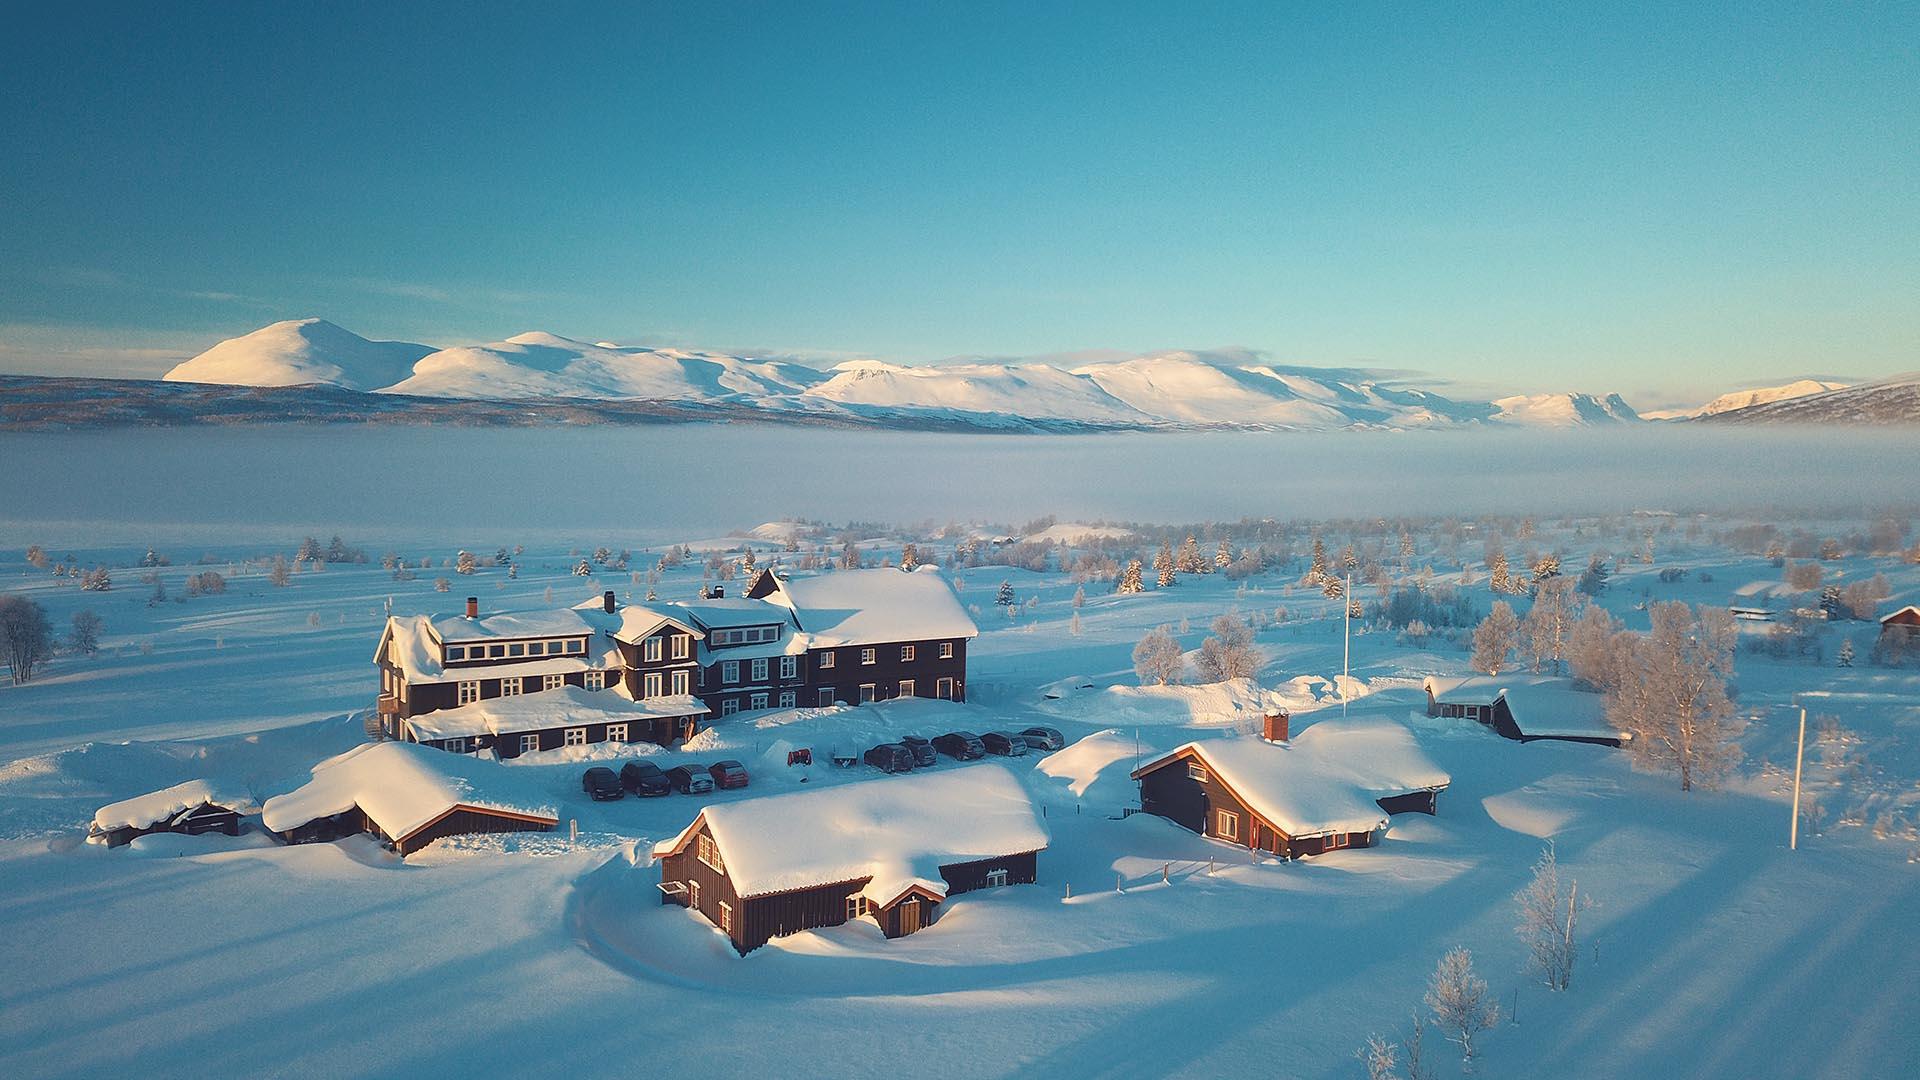 Aerial image of a hotel with cabins in the neighbourhood in open, snow-covered mountain landscape above the tree line with a large snow-covered lake and high mountains at the horizon